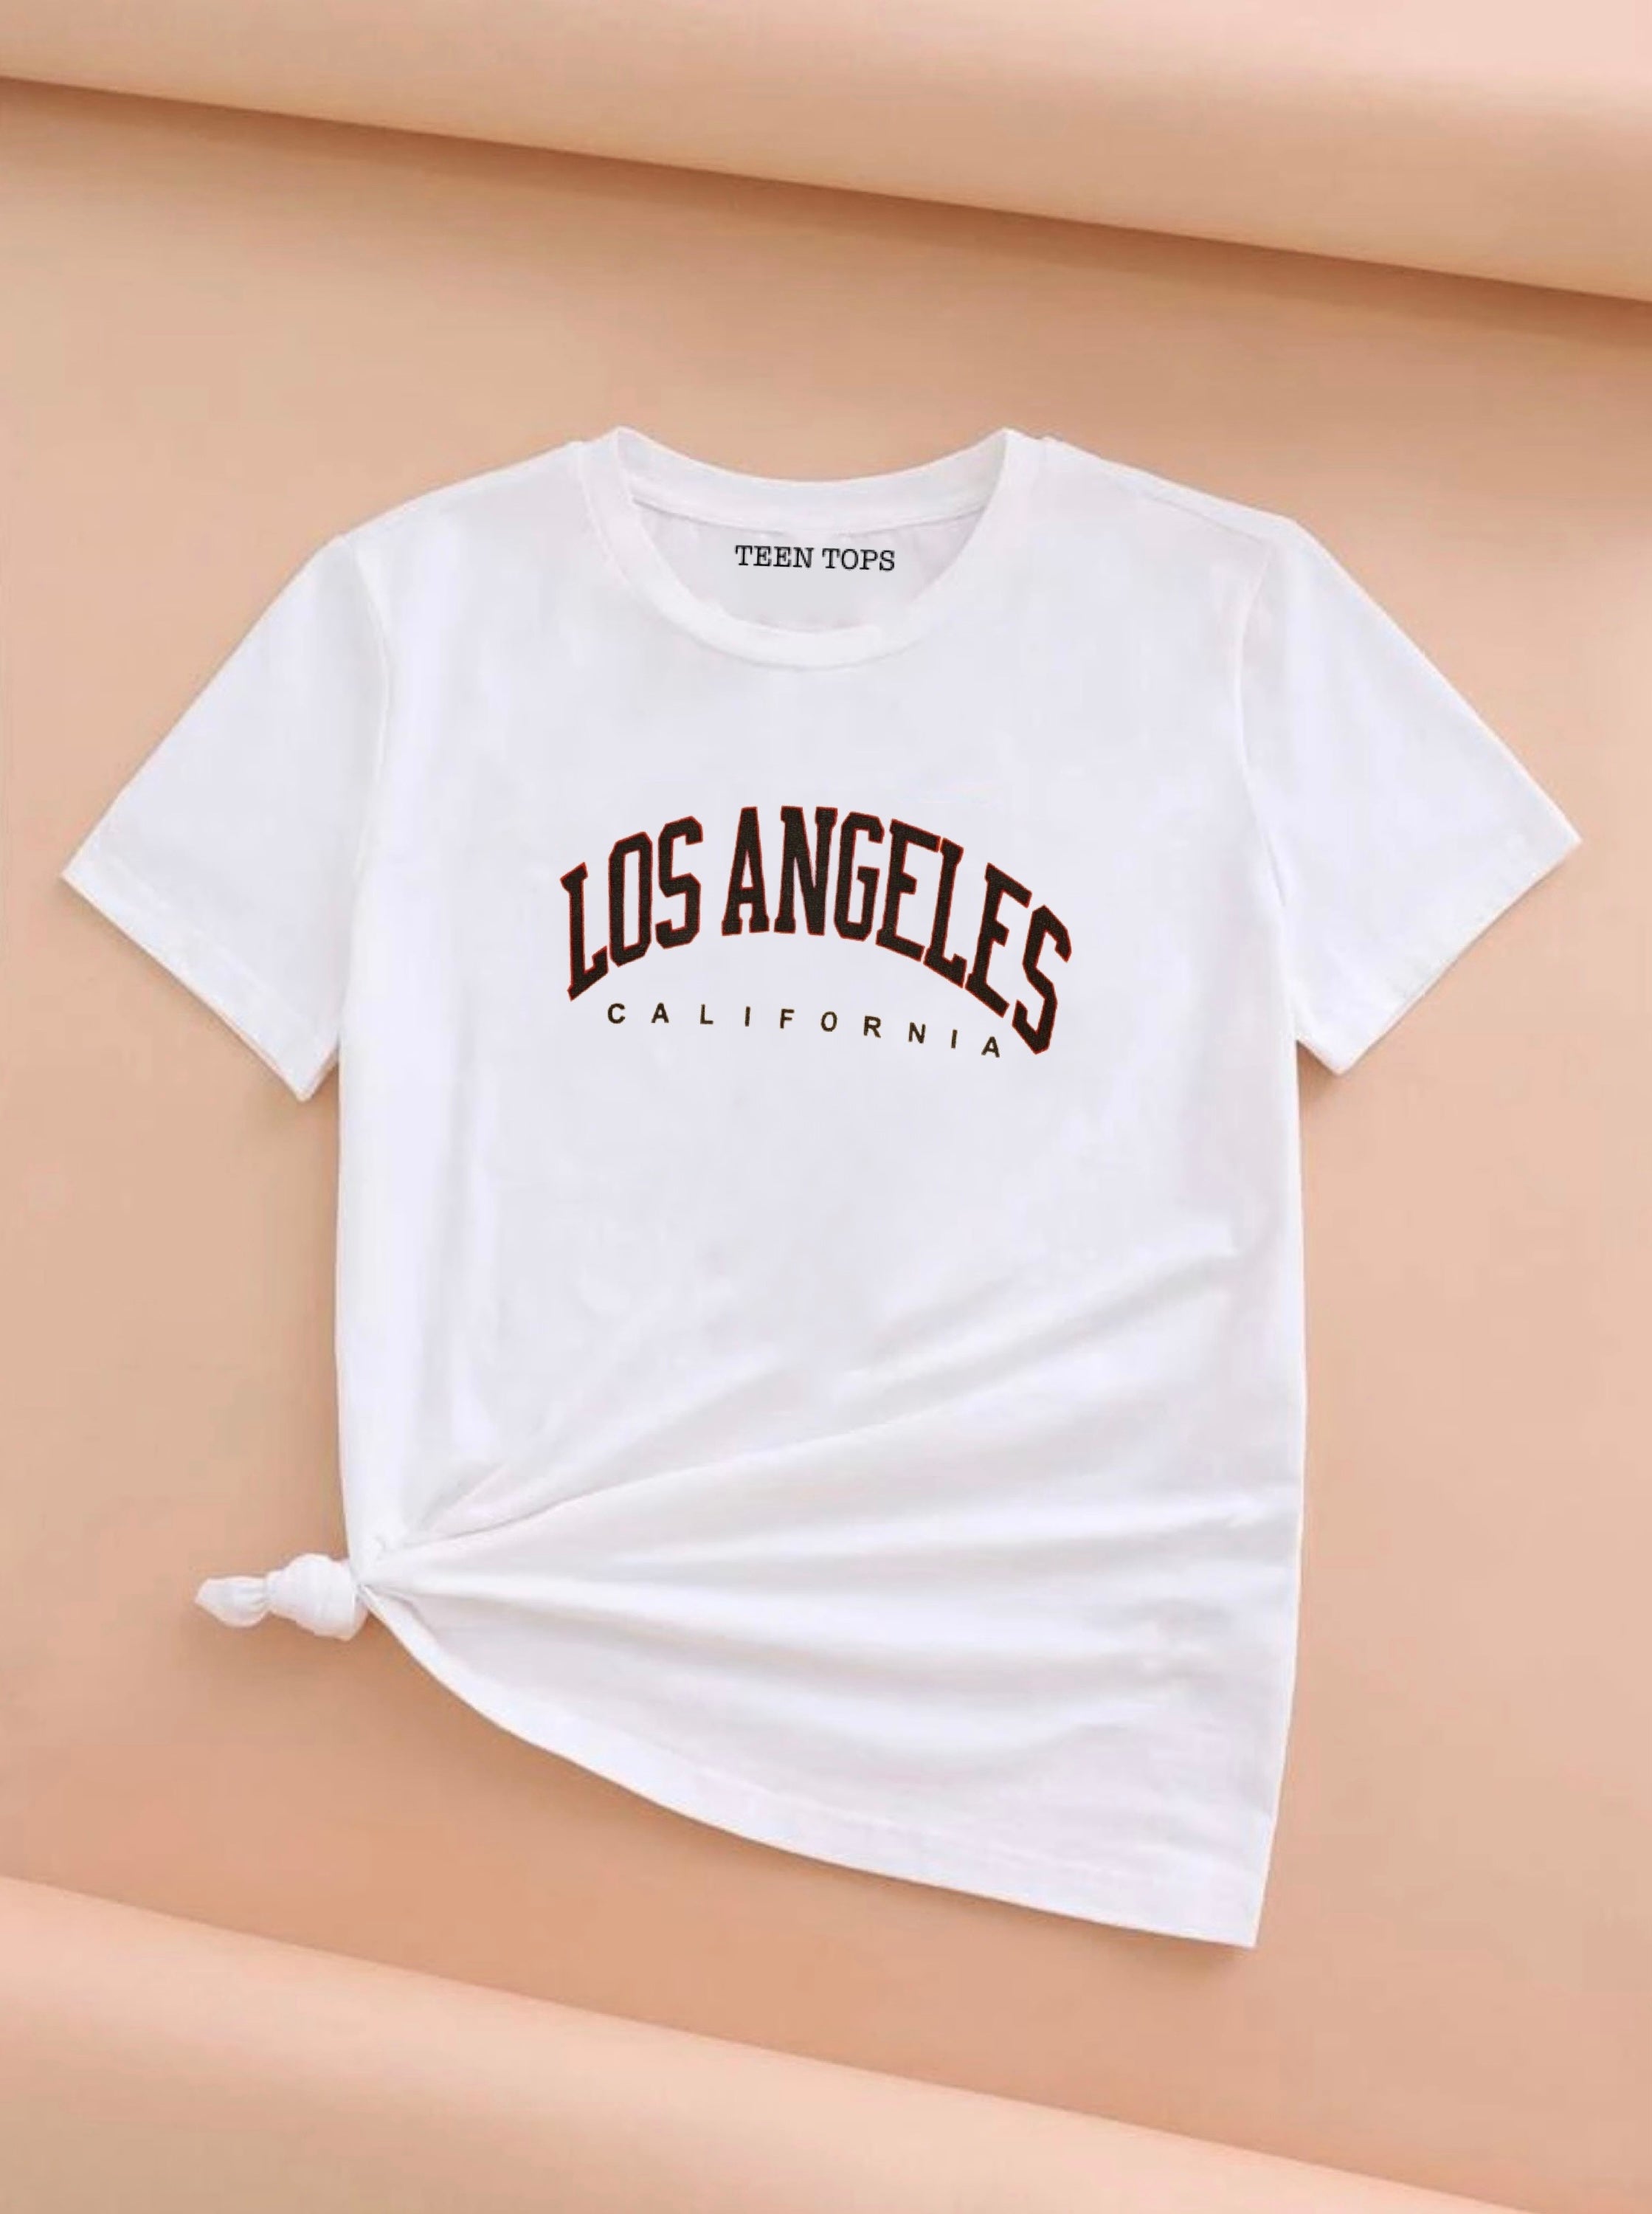 Buy Los Angeles White Tshirt for Womens T-Shirt Online at Lowest Price